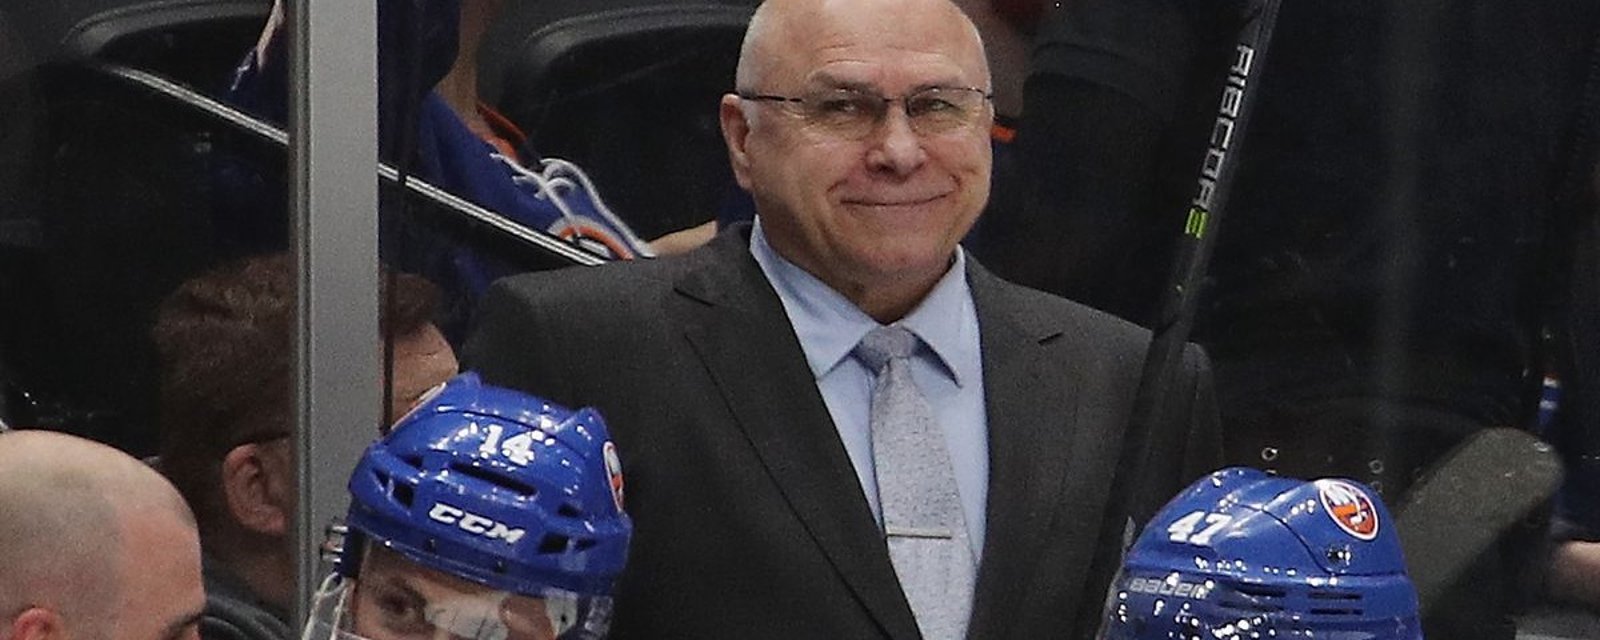 Barry Trotz makes his return to the NHL in dramatic fashion!